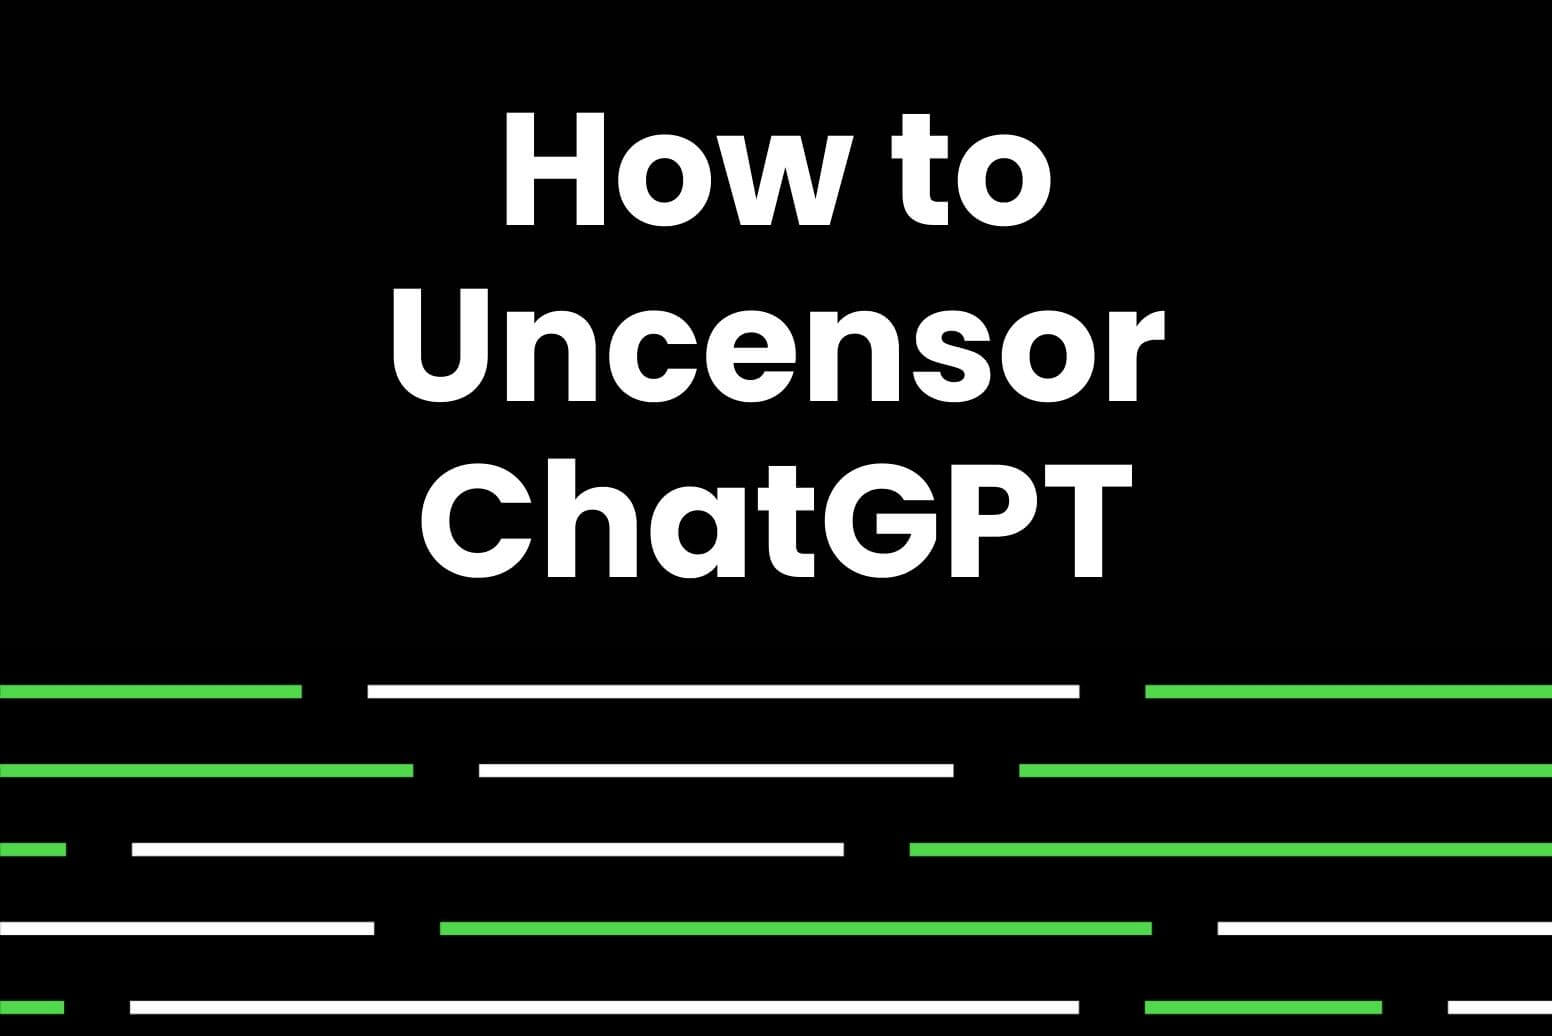 How to uncensor ChatGPT